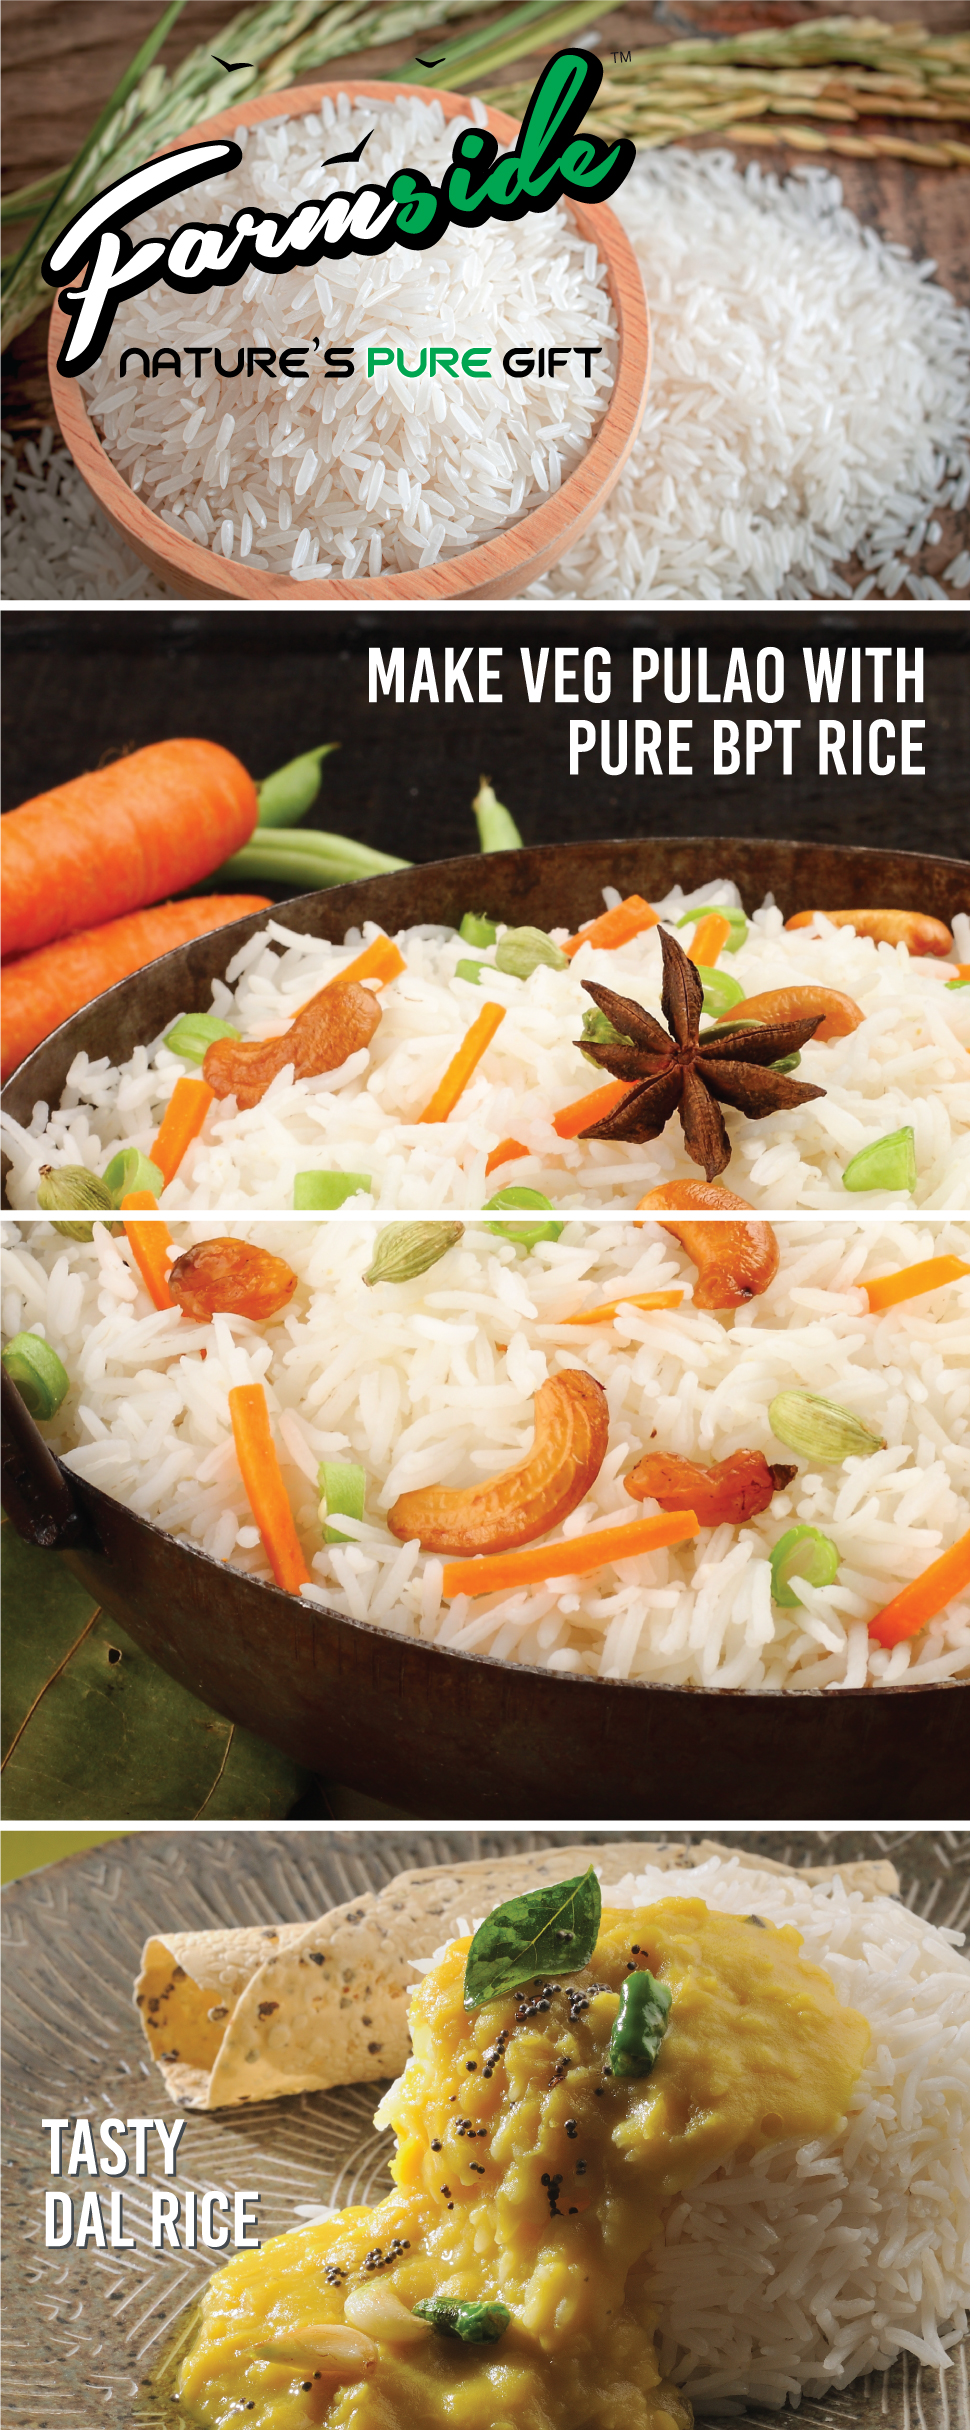 Image of A Plus content for everyday rice BPT with images of Veg Pulao & Dal Rice.